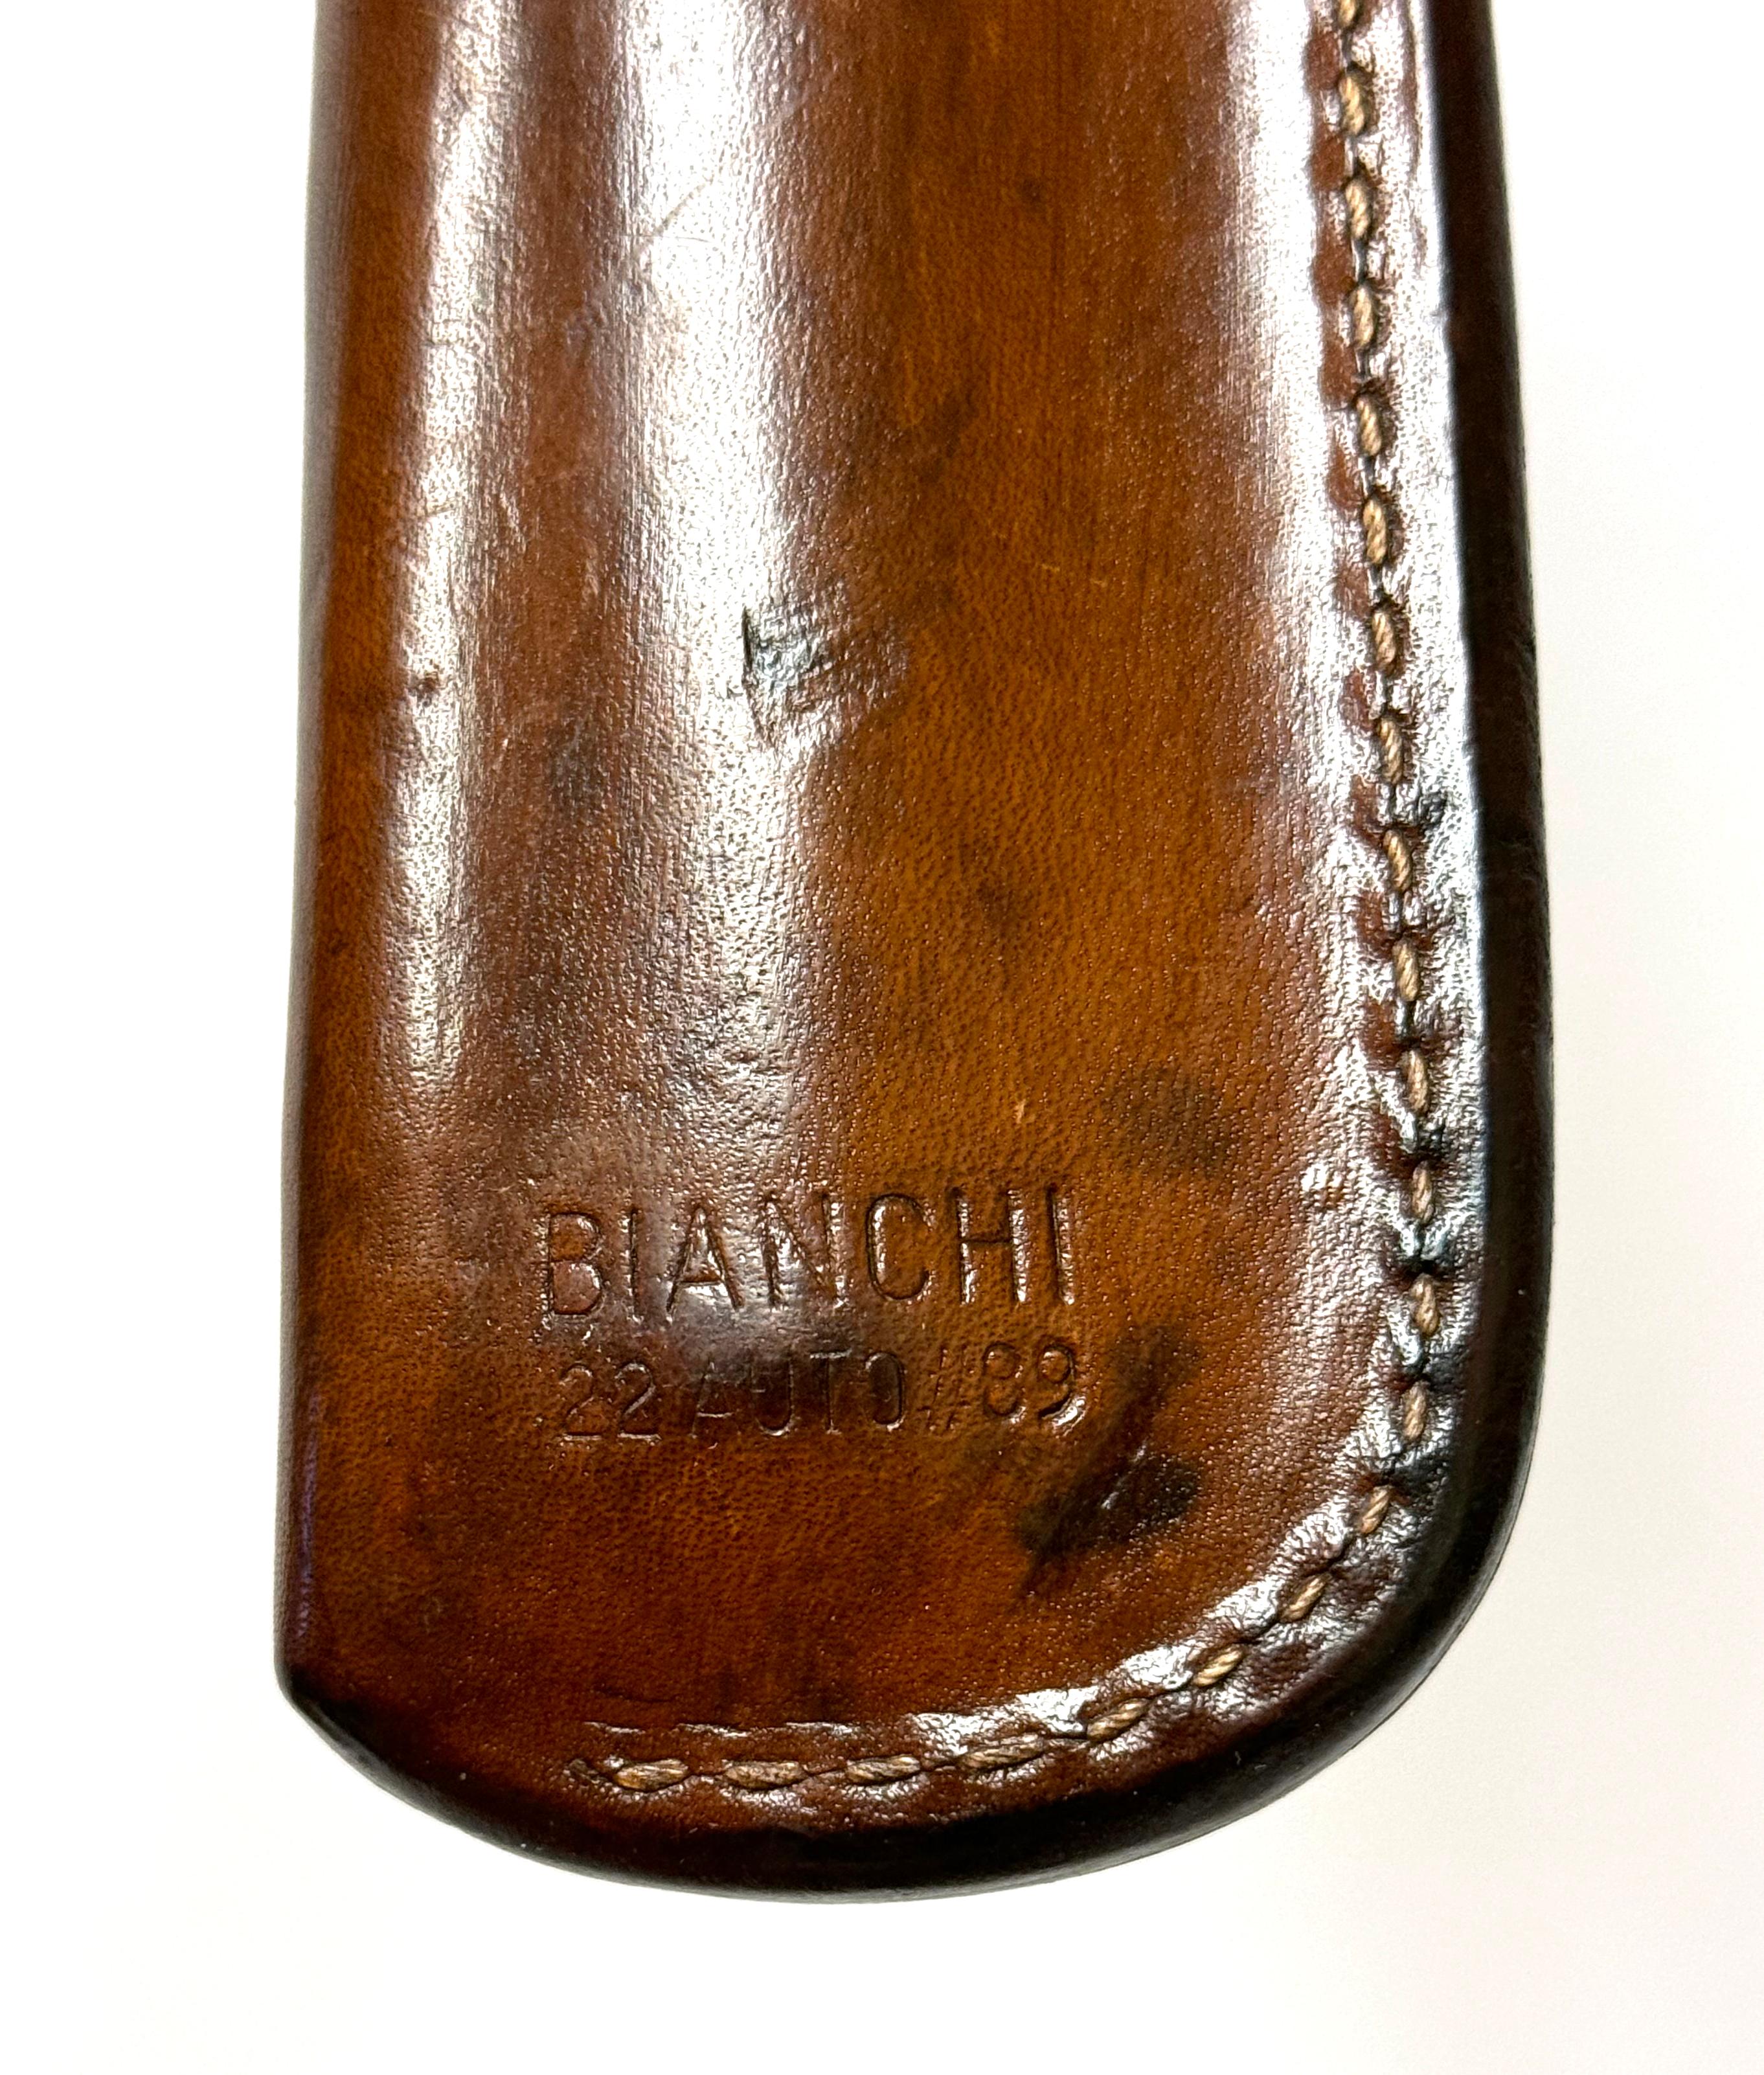 (3) Bianchi .22 AUTO #89 Leather Holsters